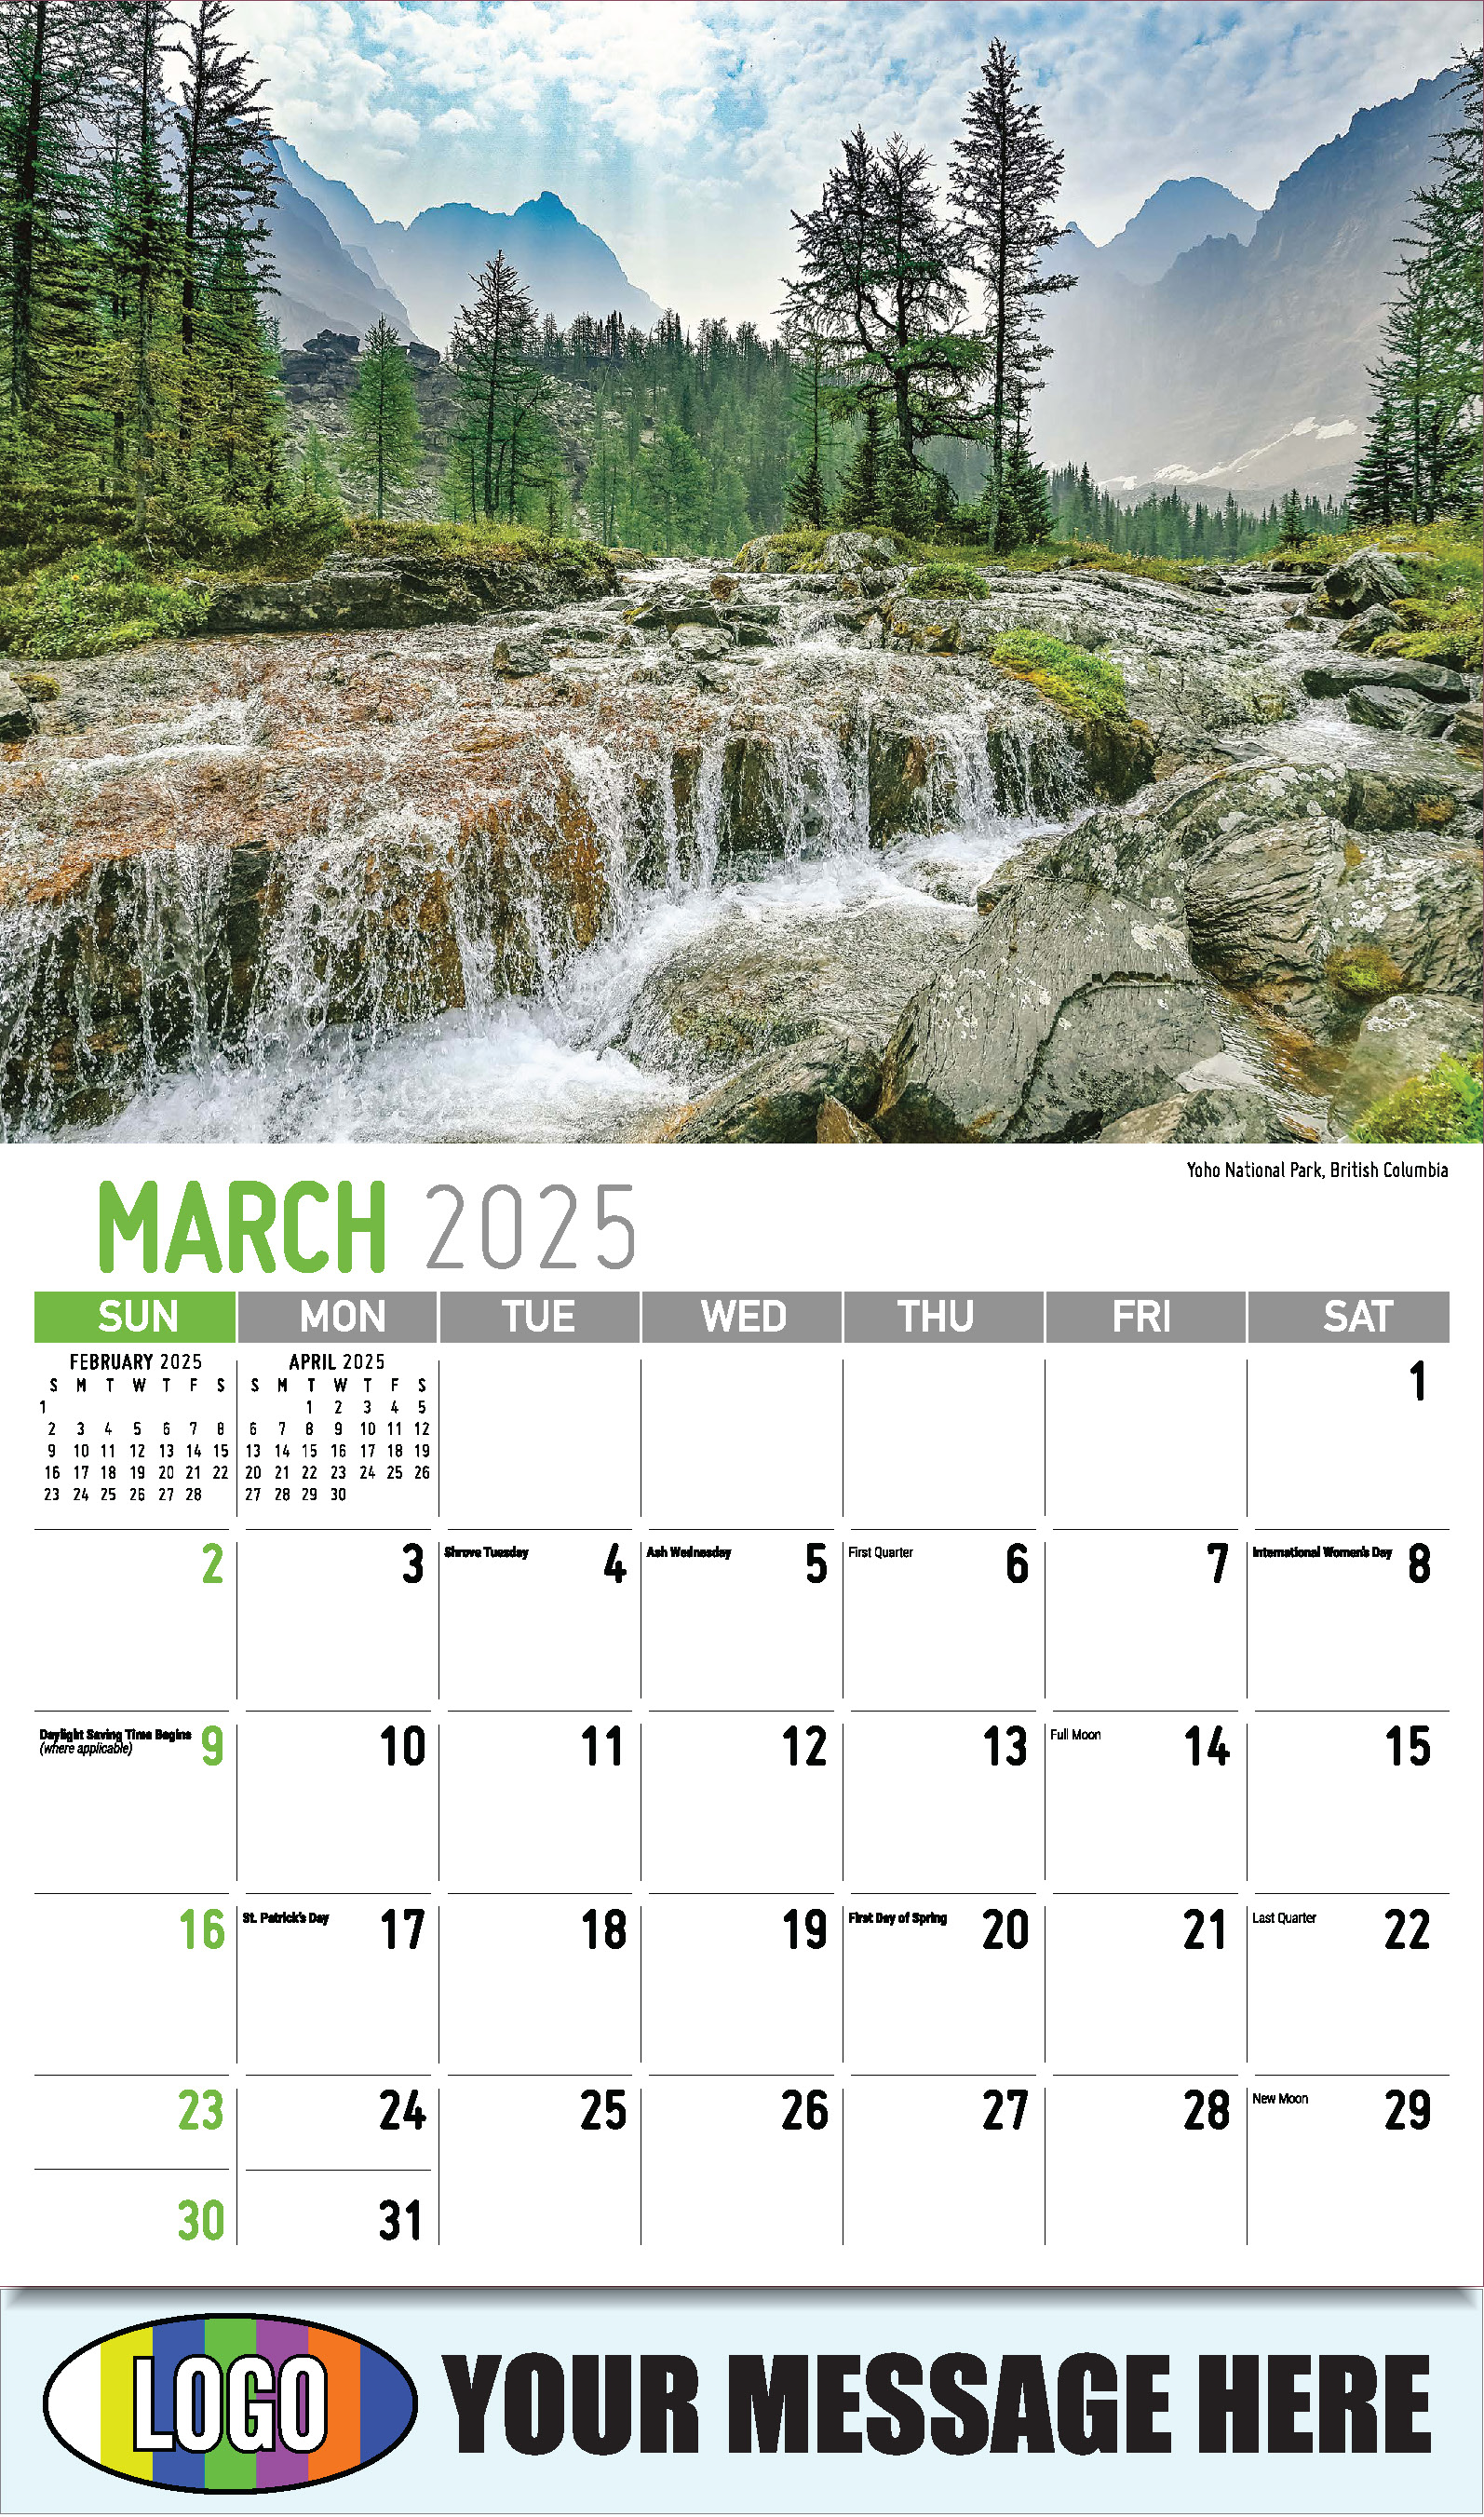 Scenes of Western Canada 2025 Business Promotional Wall Calendar - March